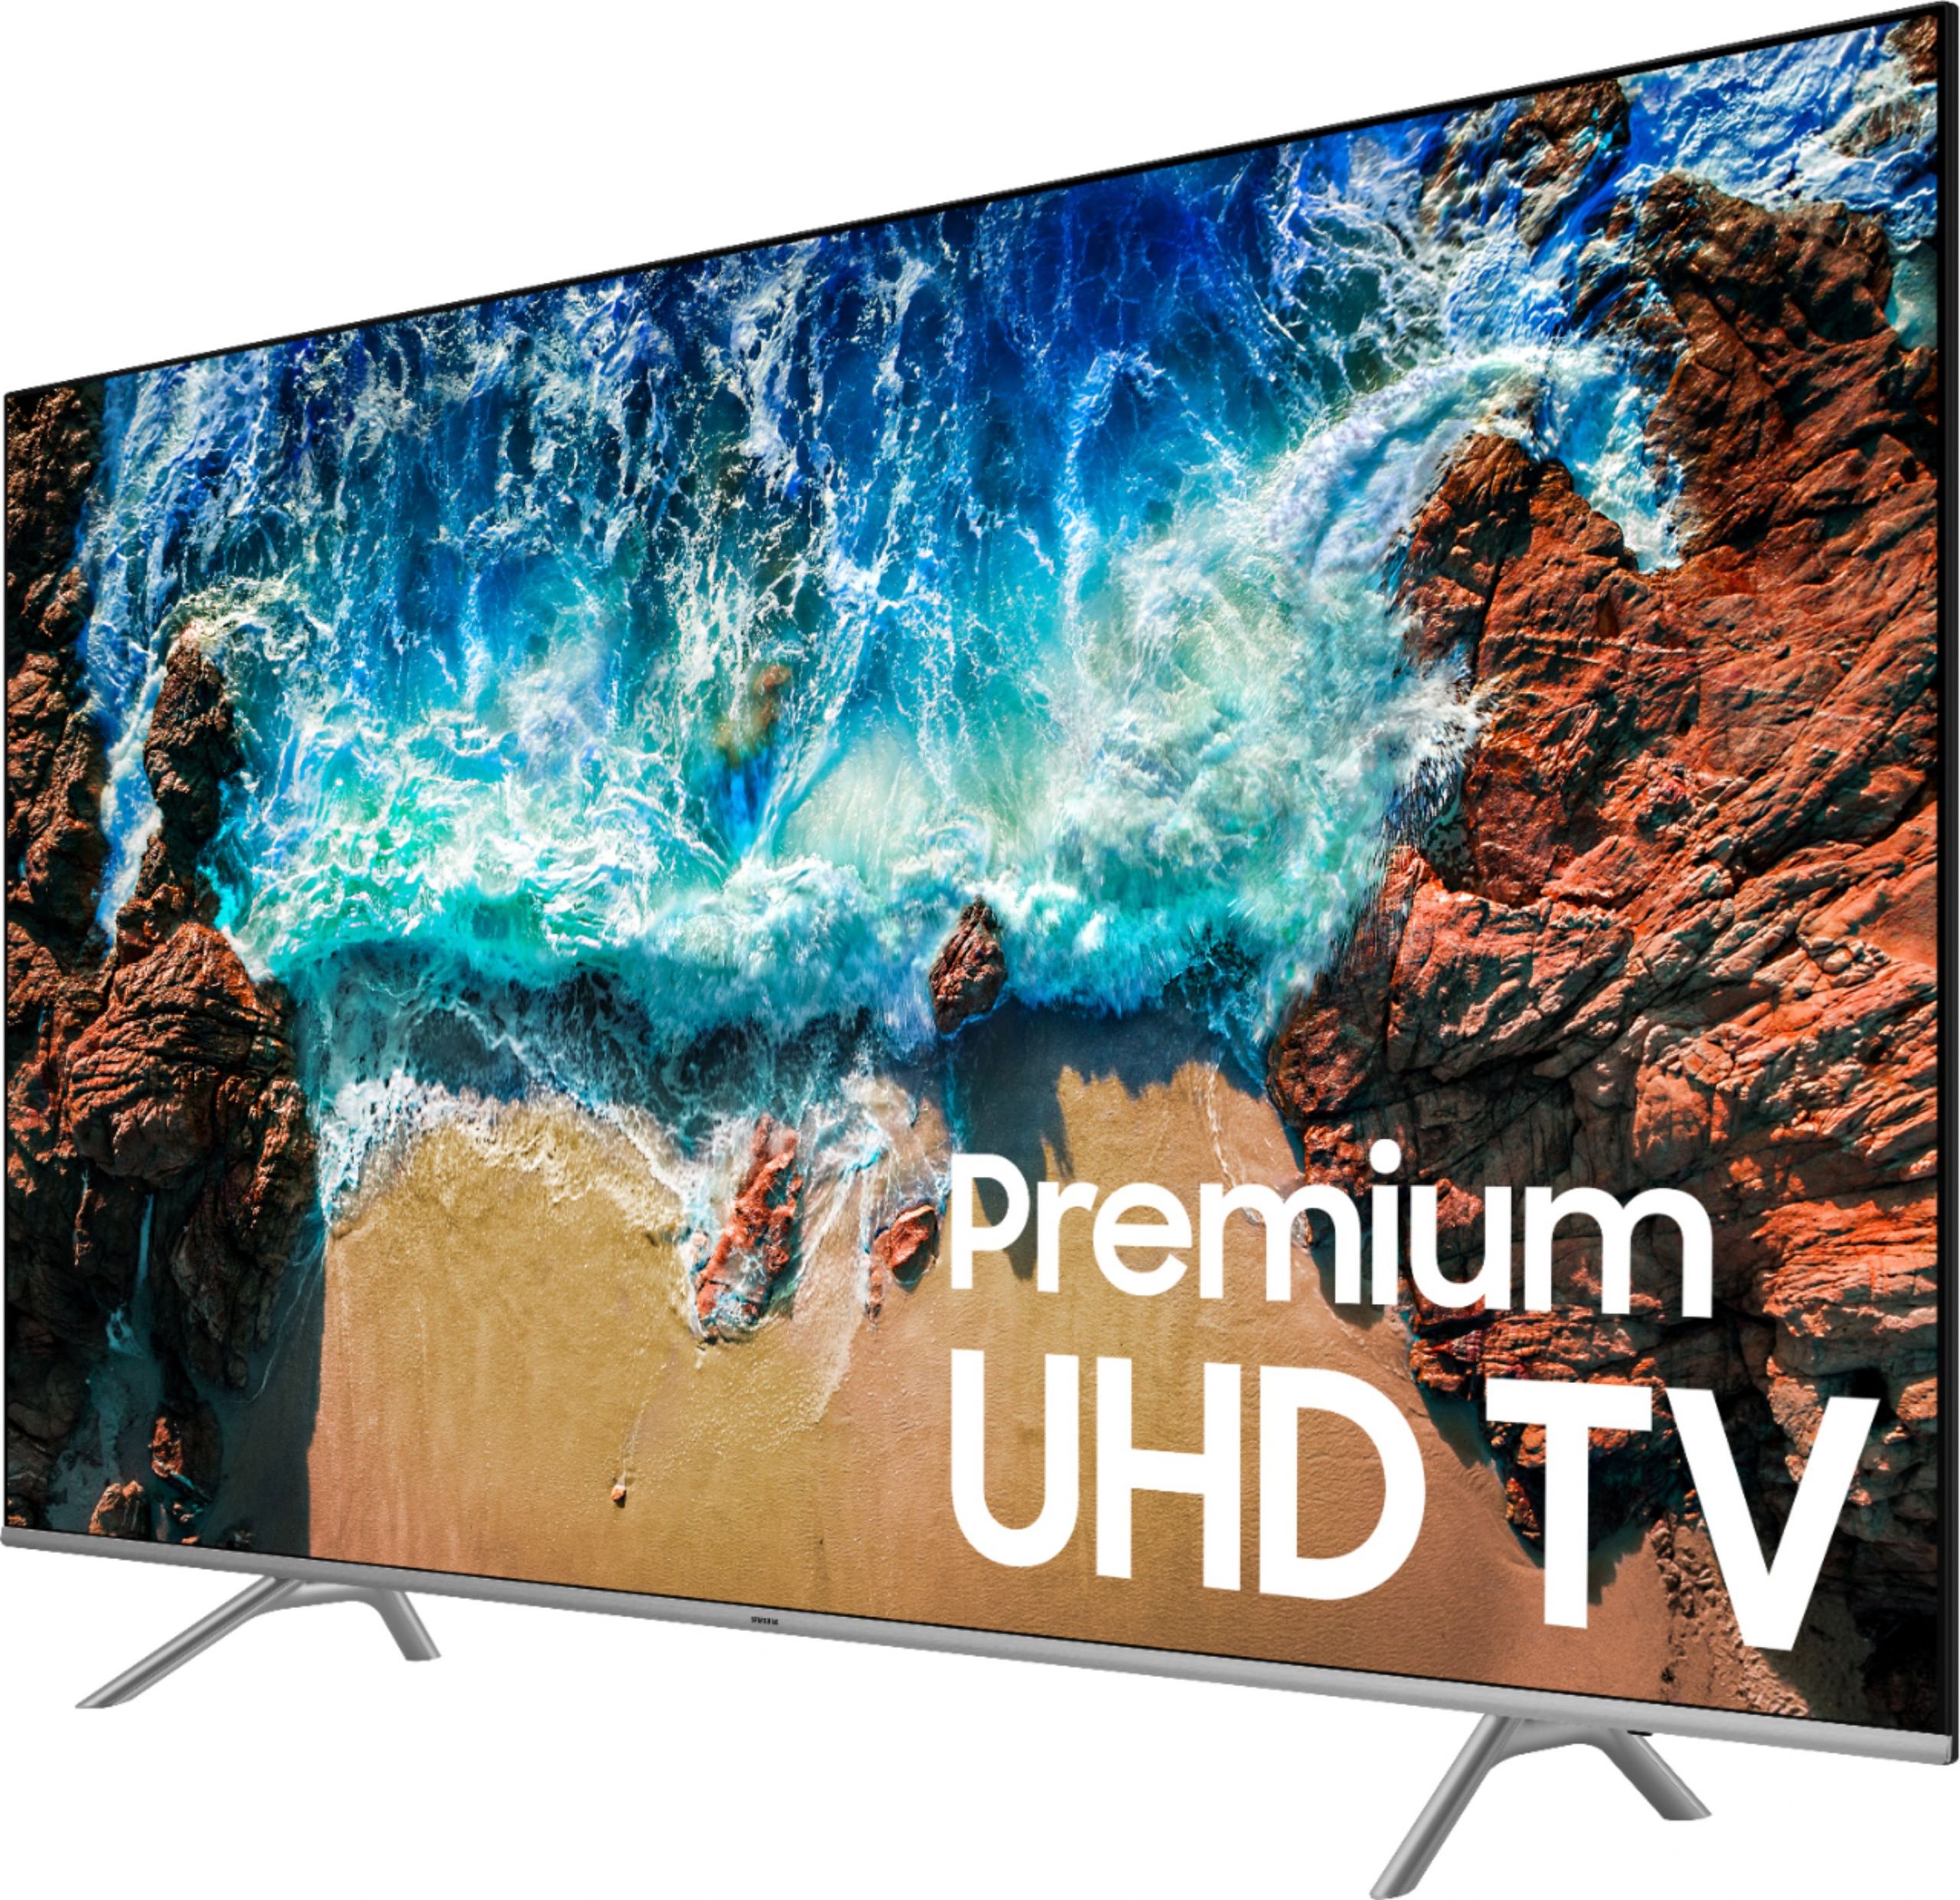 Unique Tv Stands Luxury Samsung 82" Class Led Nu8000 Series 2160p Smart 4k Uhd Tv with Hdr